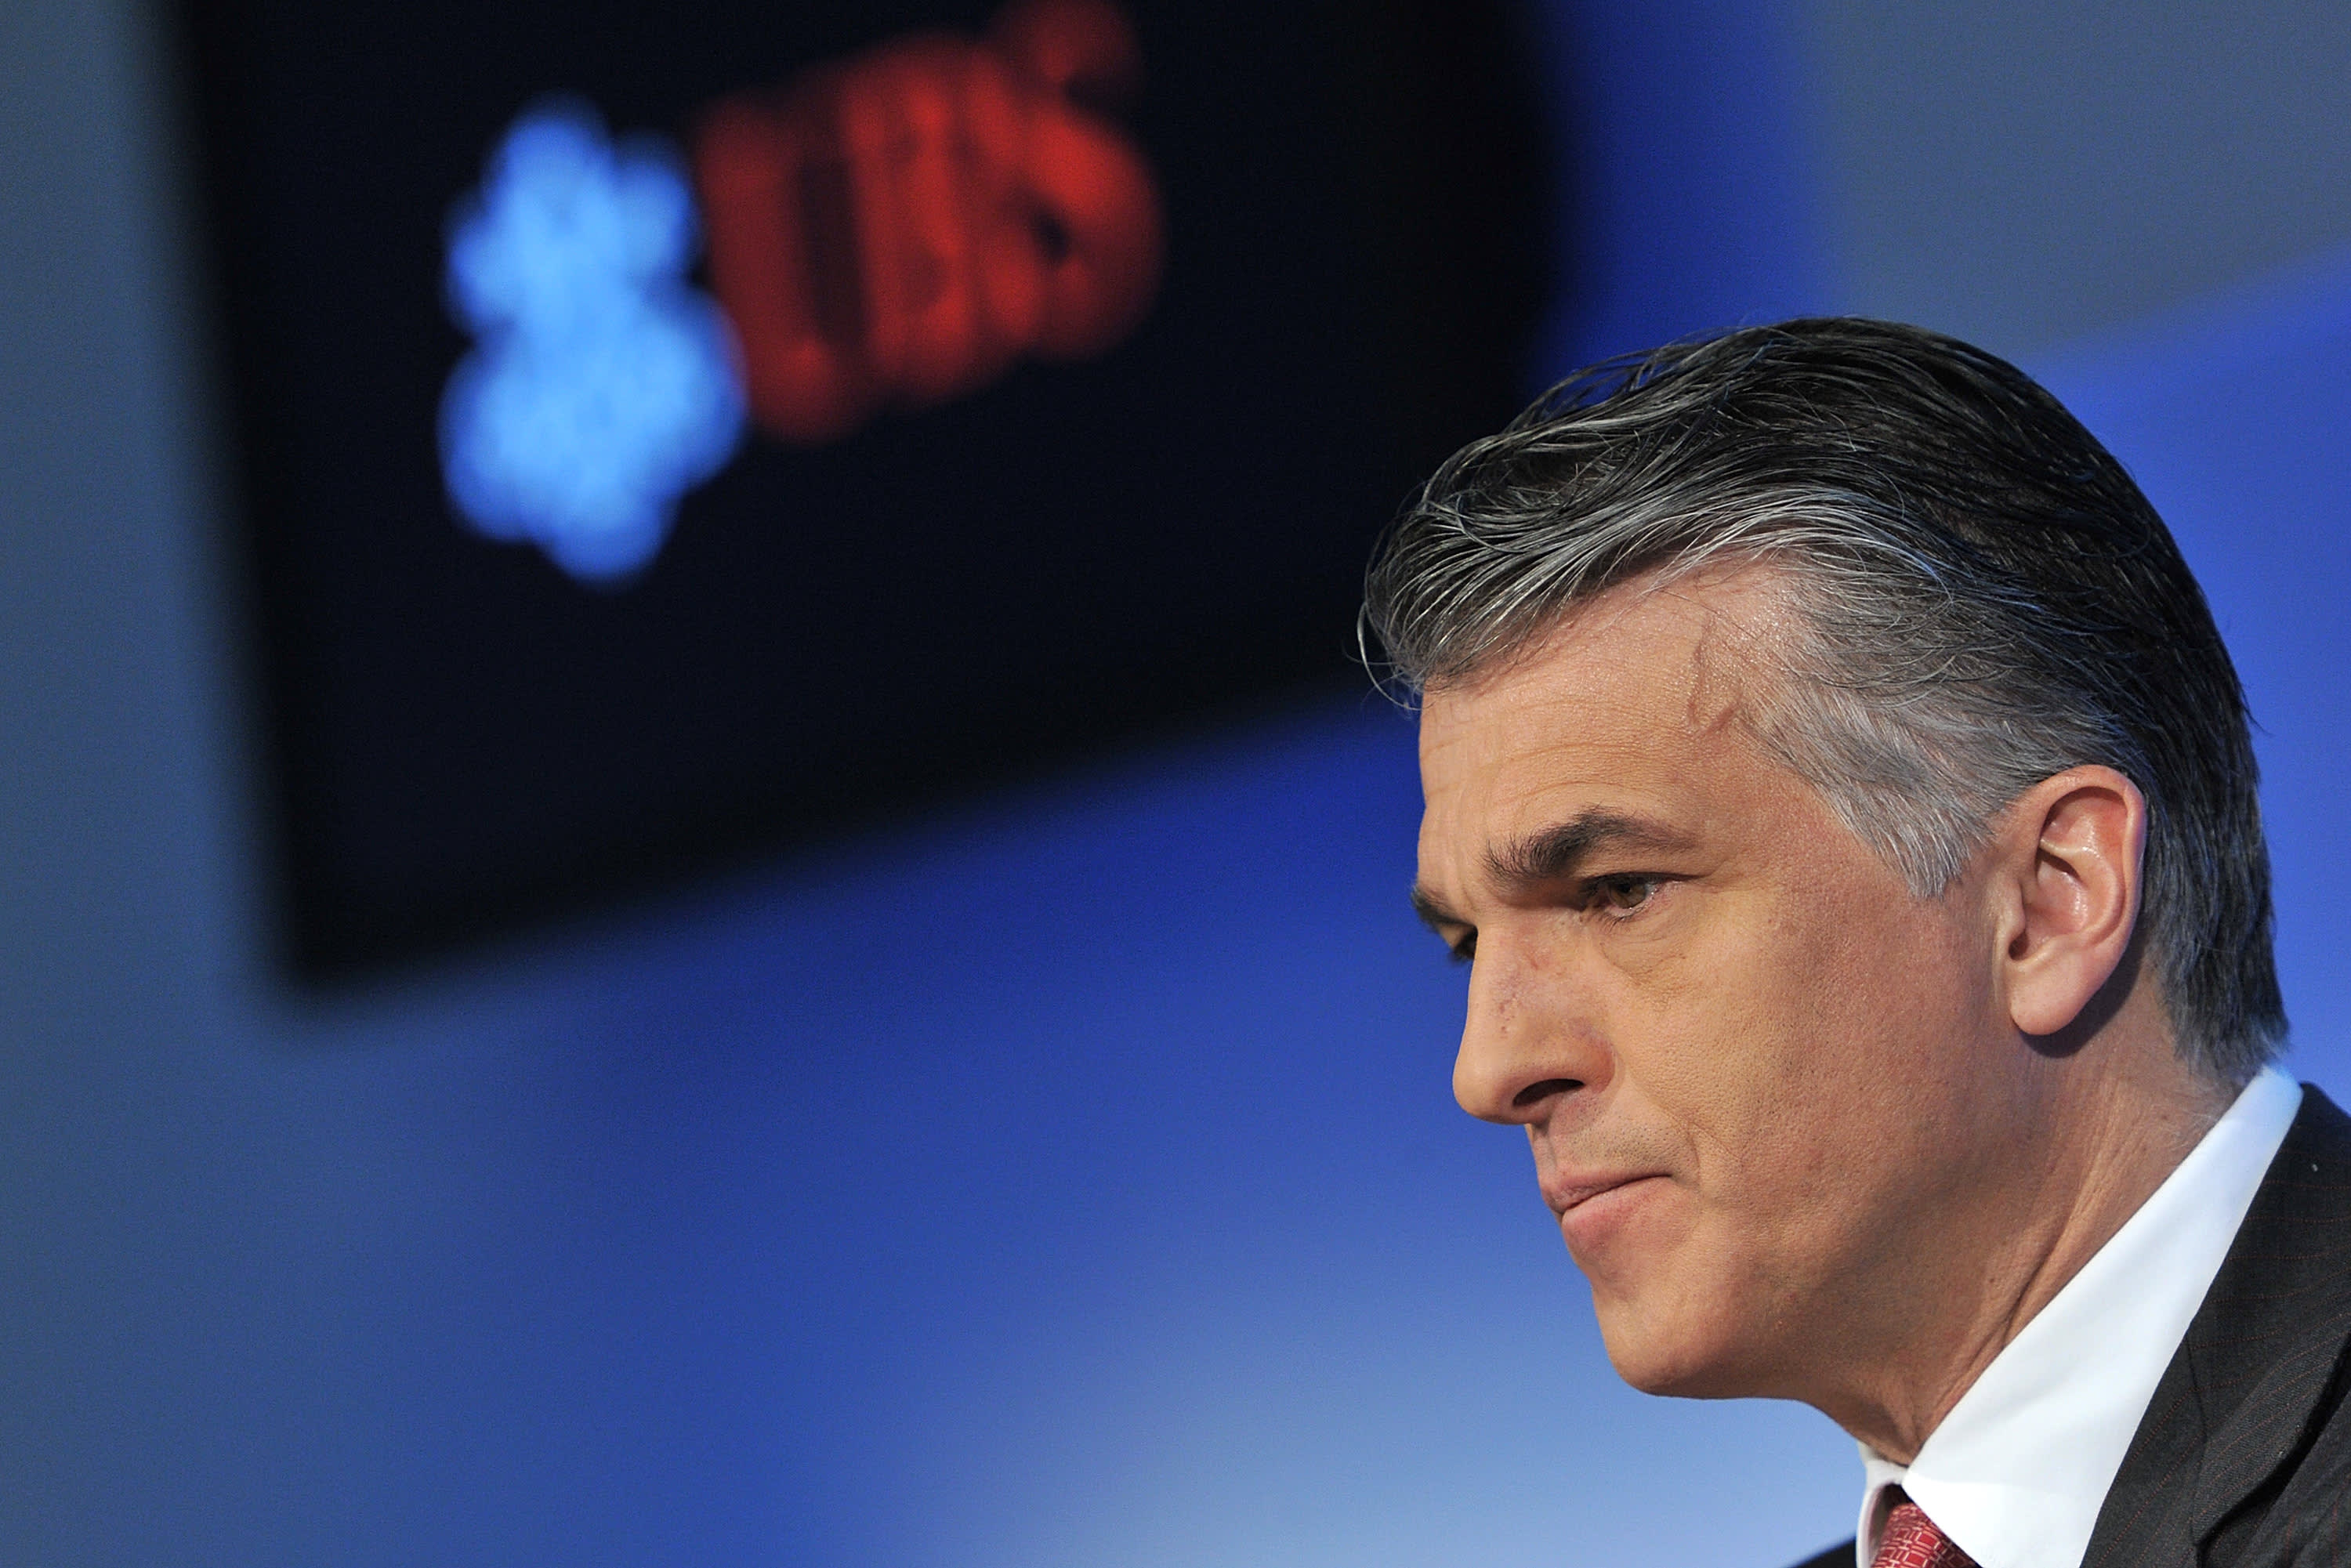 UBS appoints Sergio Ermotti as new CEO following the acquisition of Credit Suisse